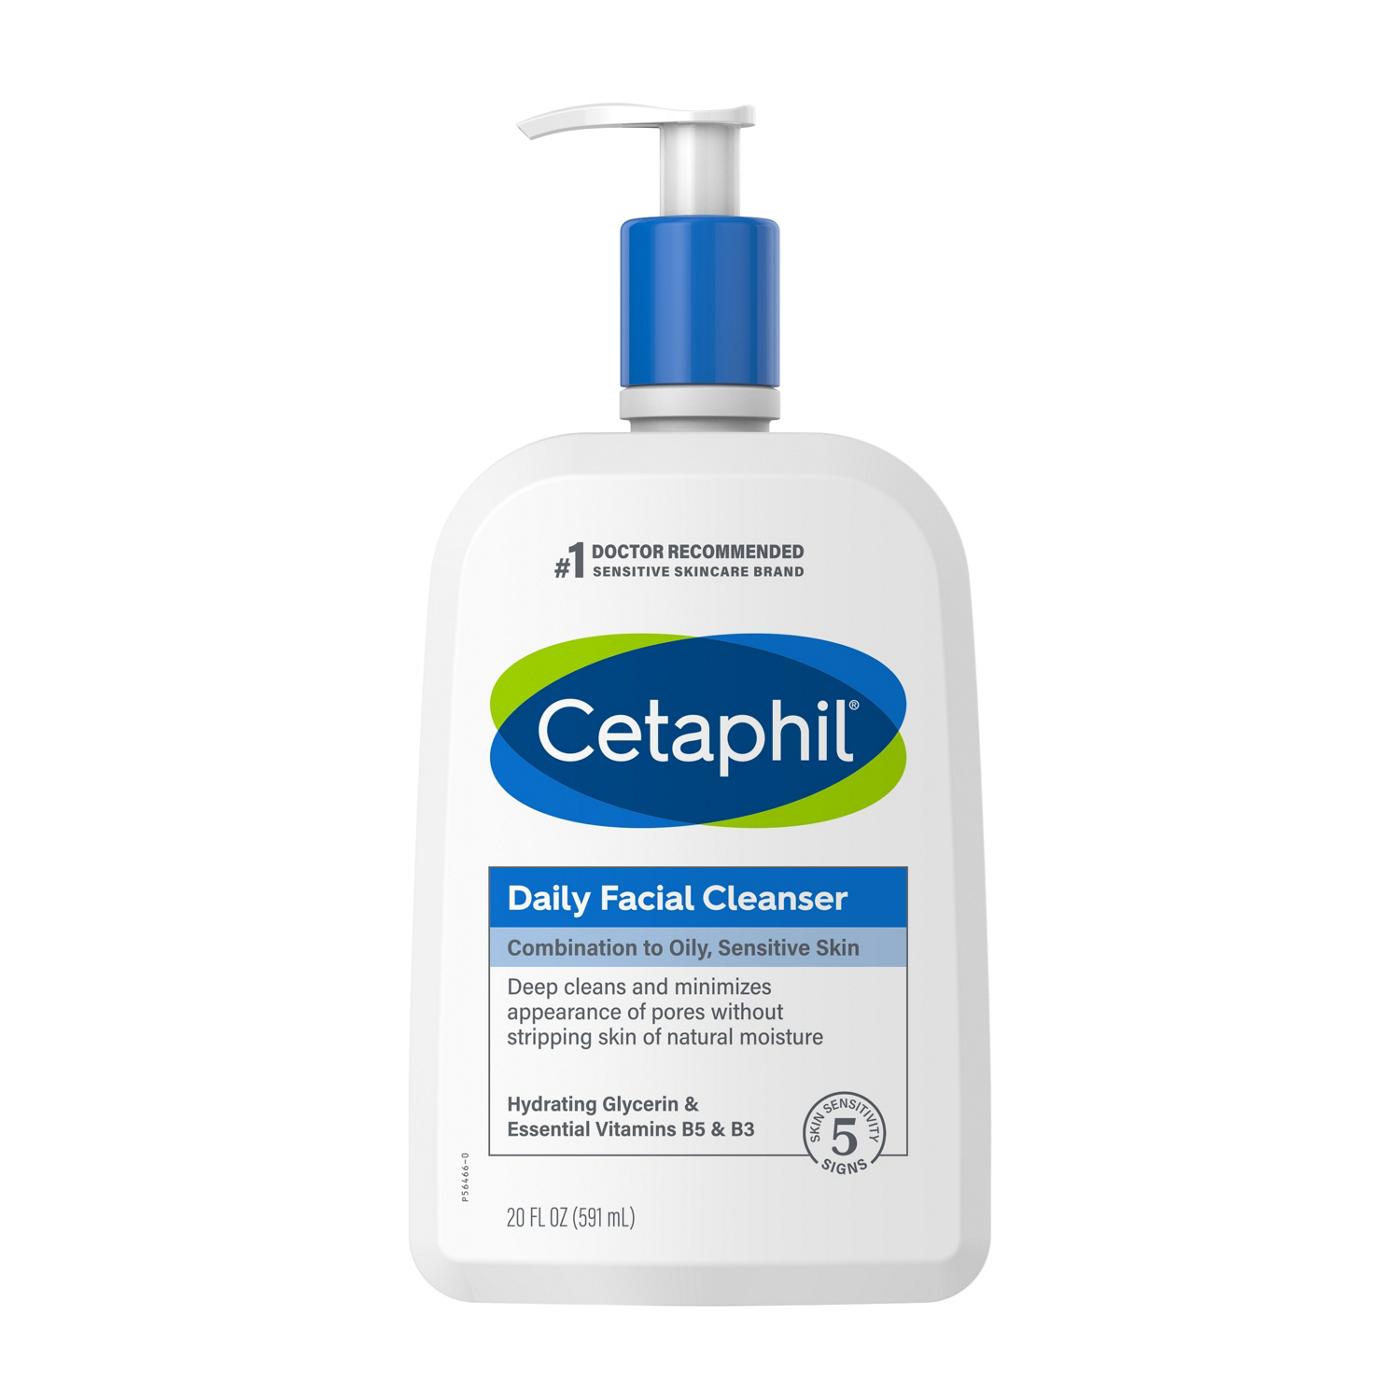 Cetaphil Daily Facial Cleanser; image 1 of 2